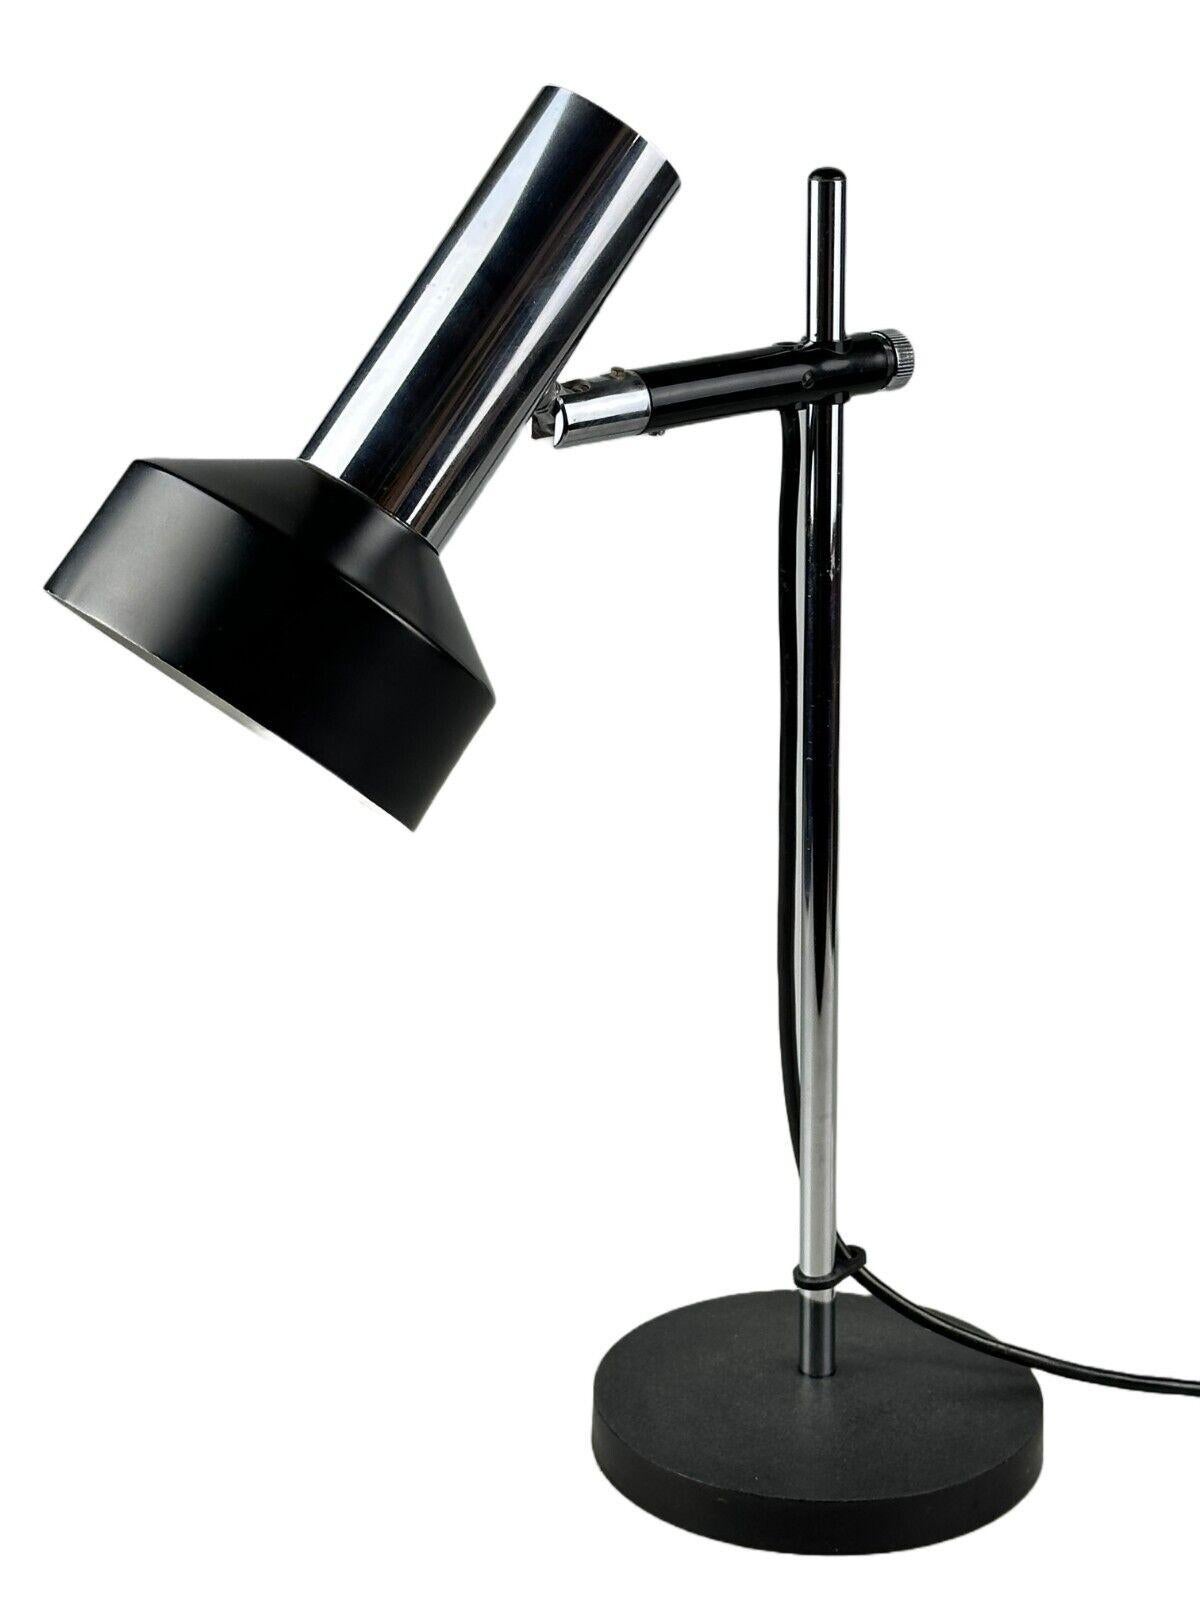 60s 70s table lamp desk lamp by Staff Leuchten Germany Mod L401

Object: wall lamp

Manufacturer: Staff

Condition: good - vintage

Age: around 1960-1970

Dimensions:

Width = 37cm
Depth = 16cm
Height = 48cm

Dimensions: metal, plastic

Other